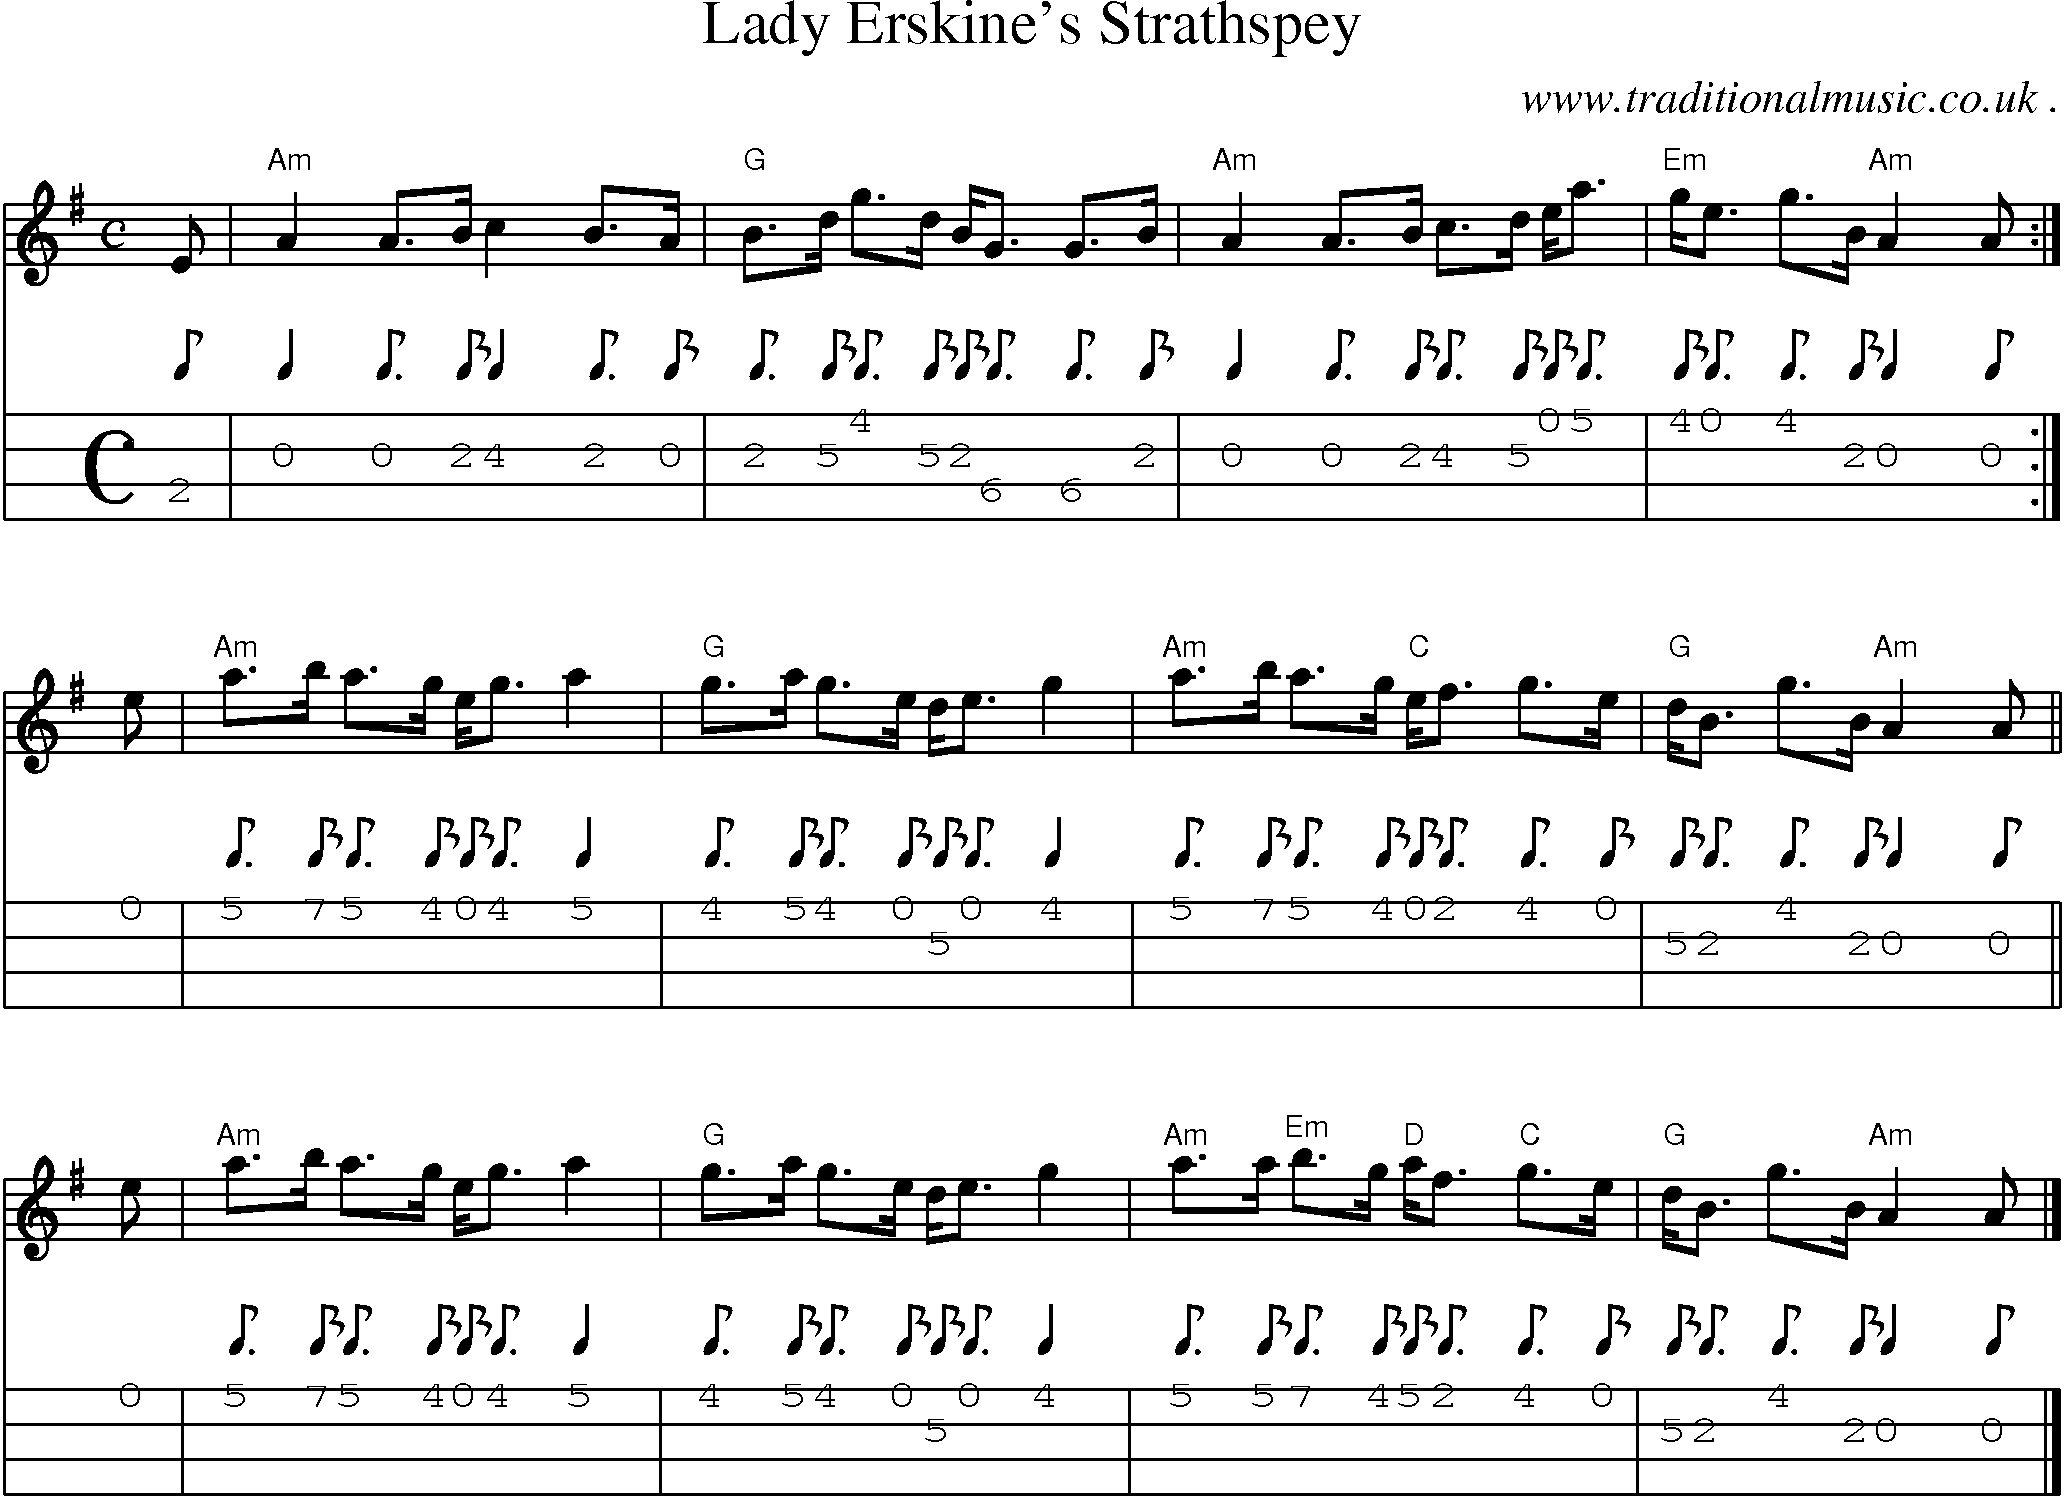 Sheet-music  score, Chords and Mandolin Tabs for Lady Erskines Strathspey